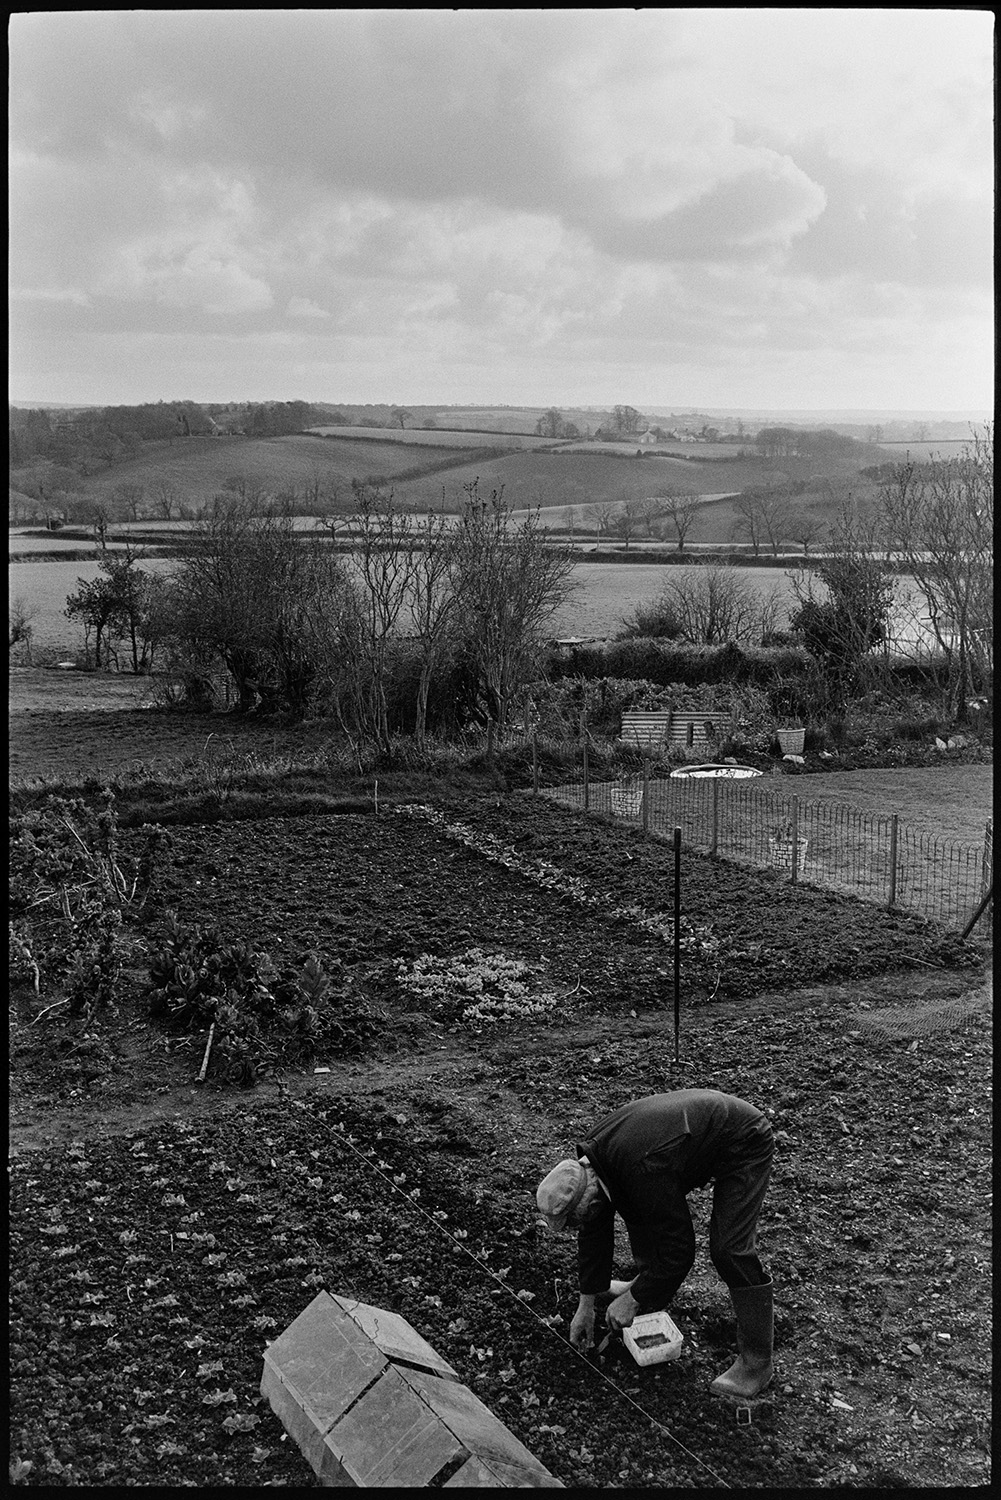 Man planting out vegetable garden. 
[A man planting seedlings in his vegetable garden at Iddesleigh. Cloches have been placed over some of the young plants. A landscape of trees and fields can be seen in the background.]